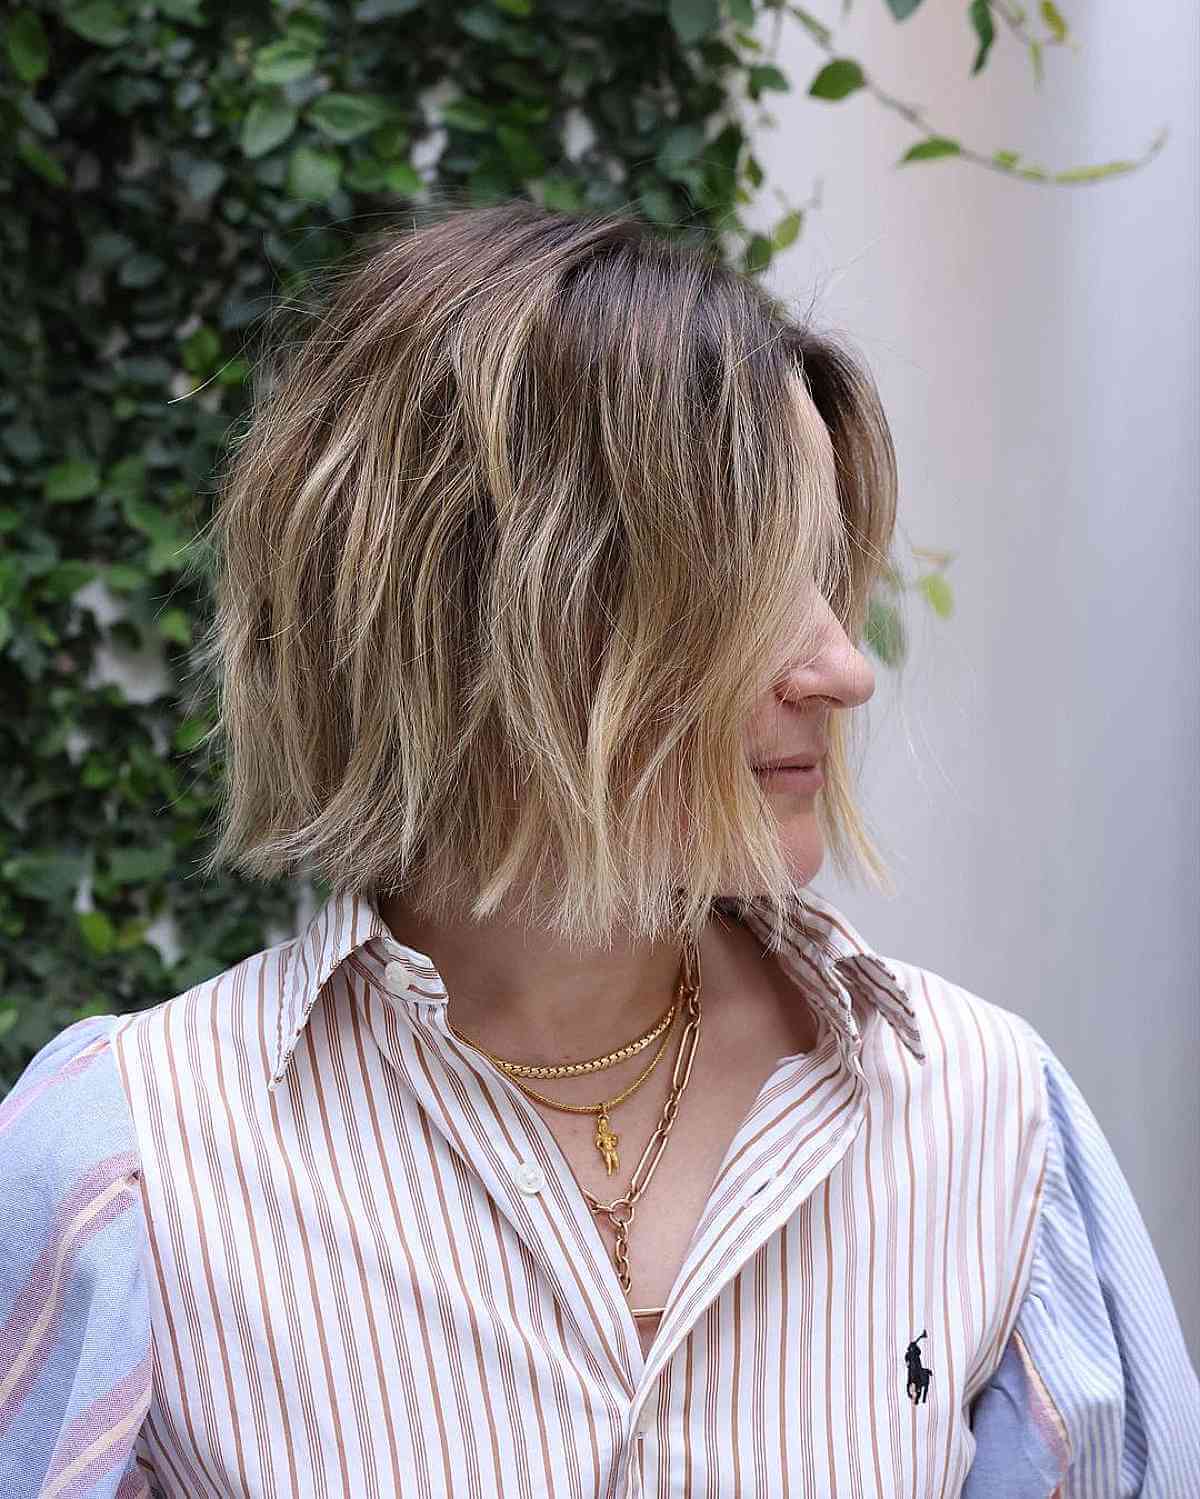 Chin-length low-maintenance cut with soft beachy waves